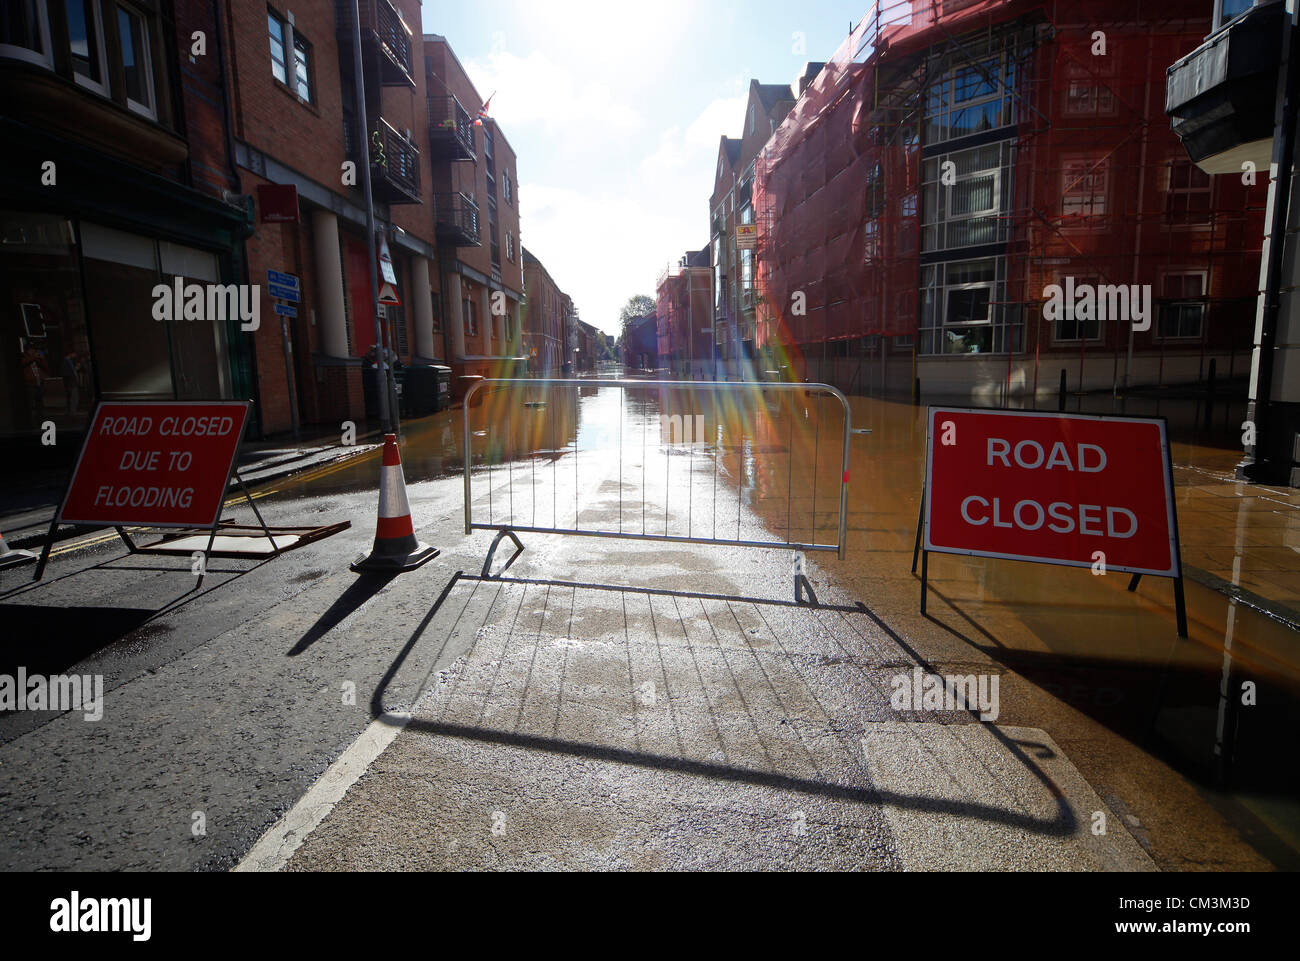 ONE OF MANY FLOODED ROADS CLOS CITY OF YORK CITY OF YORK NORTH YORKSHIRE ENGLAND 27 September 2012 Stock Photo